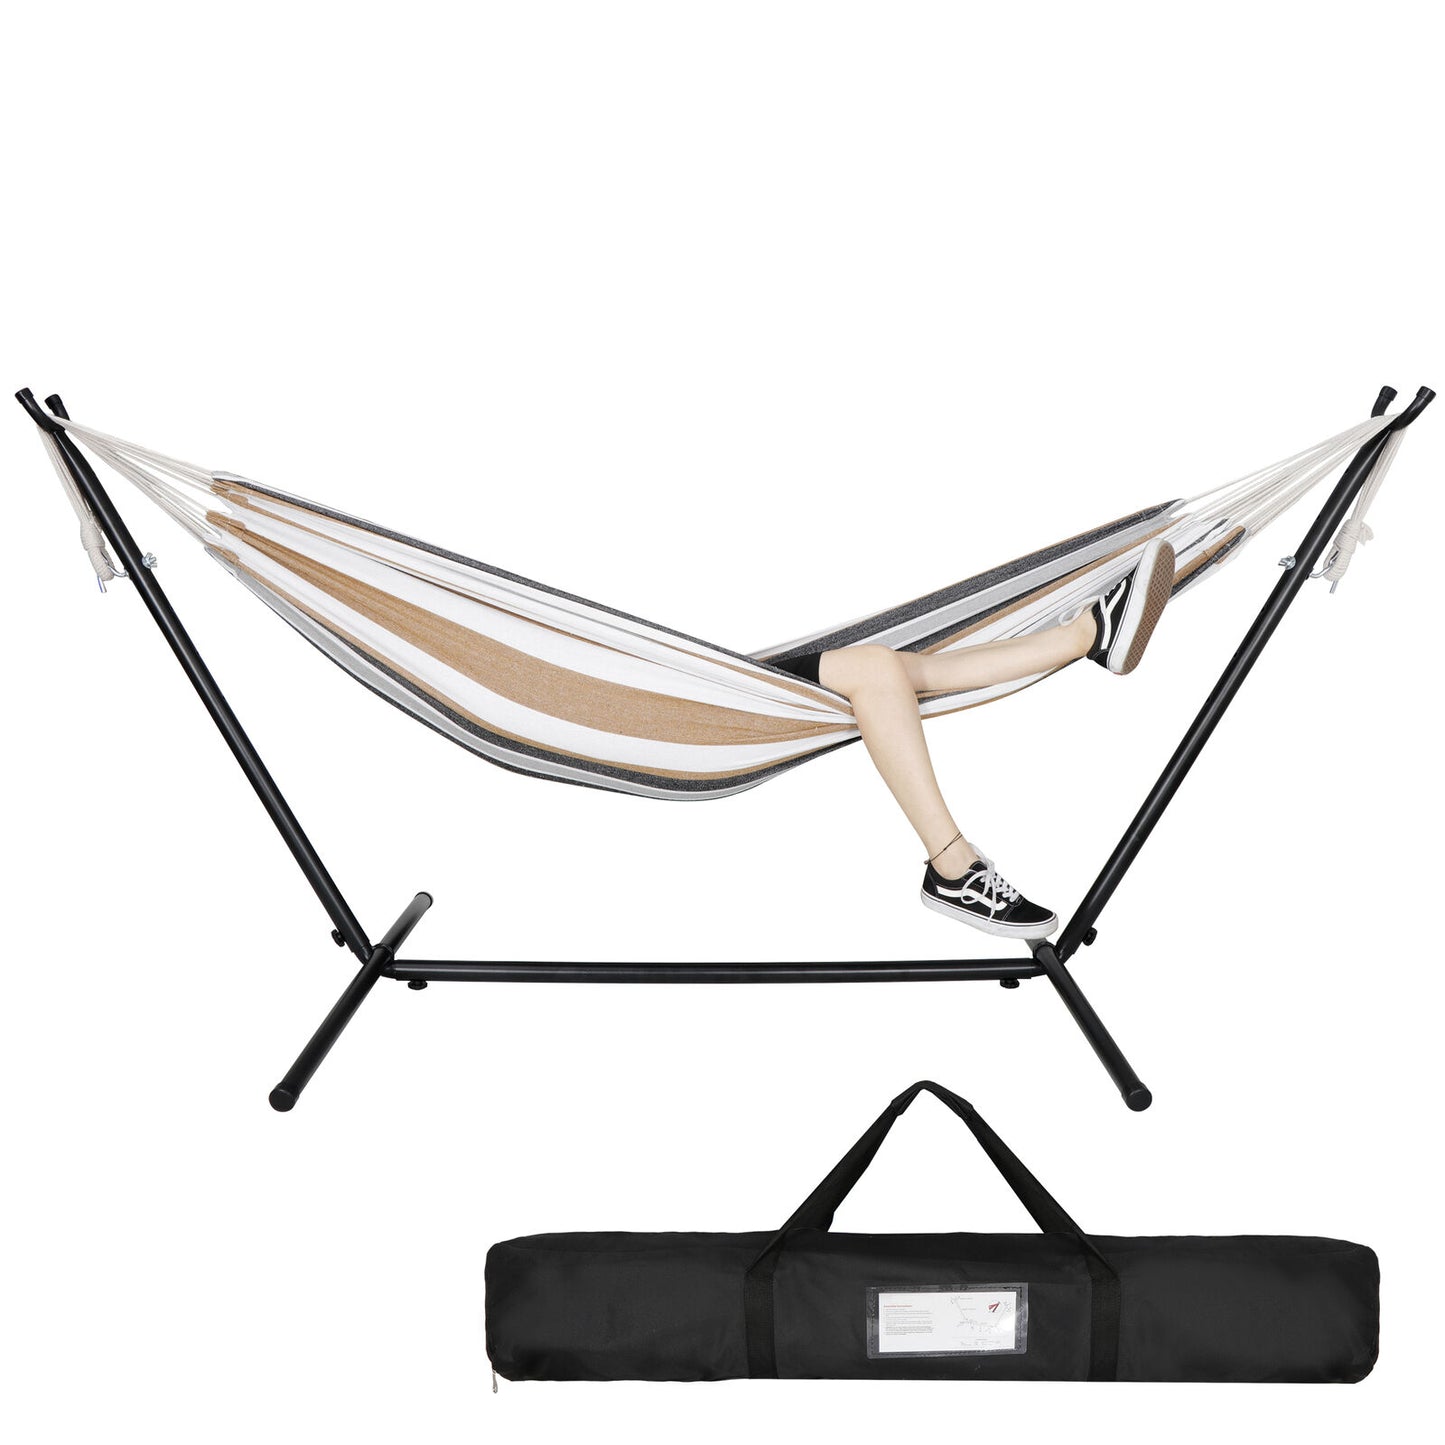 Portable Hammock with Stand for 2 person with Carrying case Outdoor Patio Use